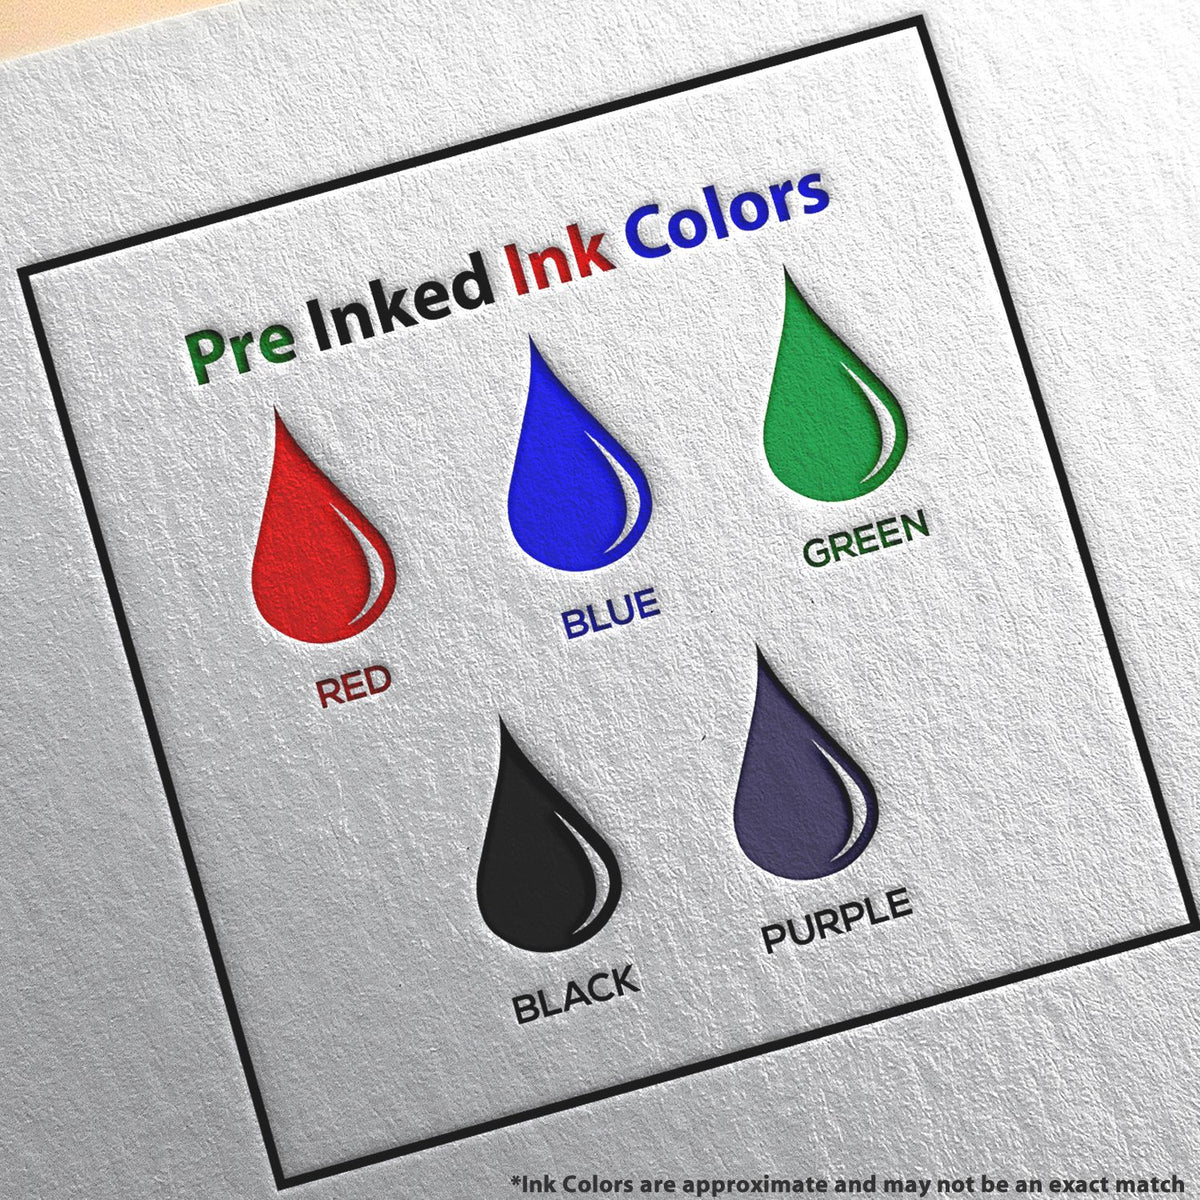 A picture showing the different ink colors or hues available for the Slim Pre-Inked Delaware Professional Geologist Seal Stamp